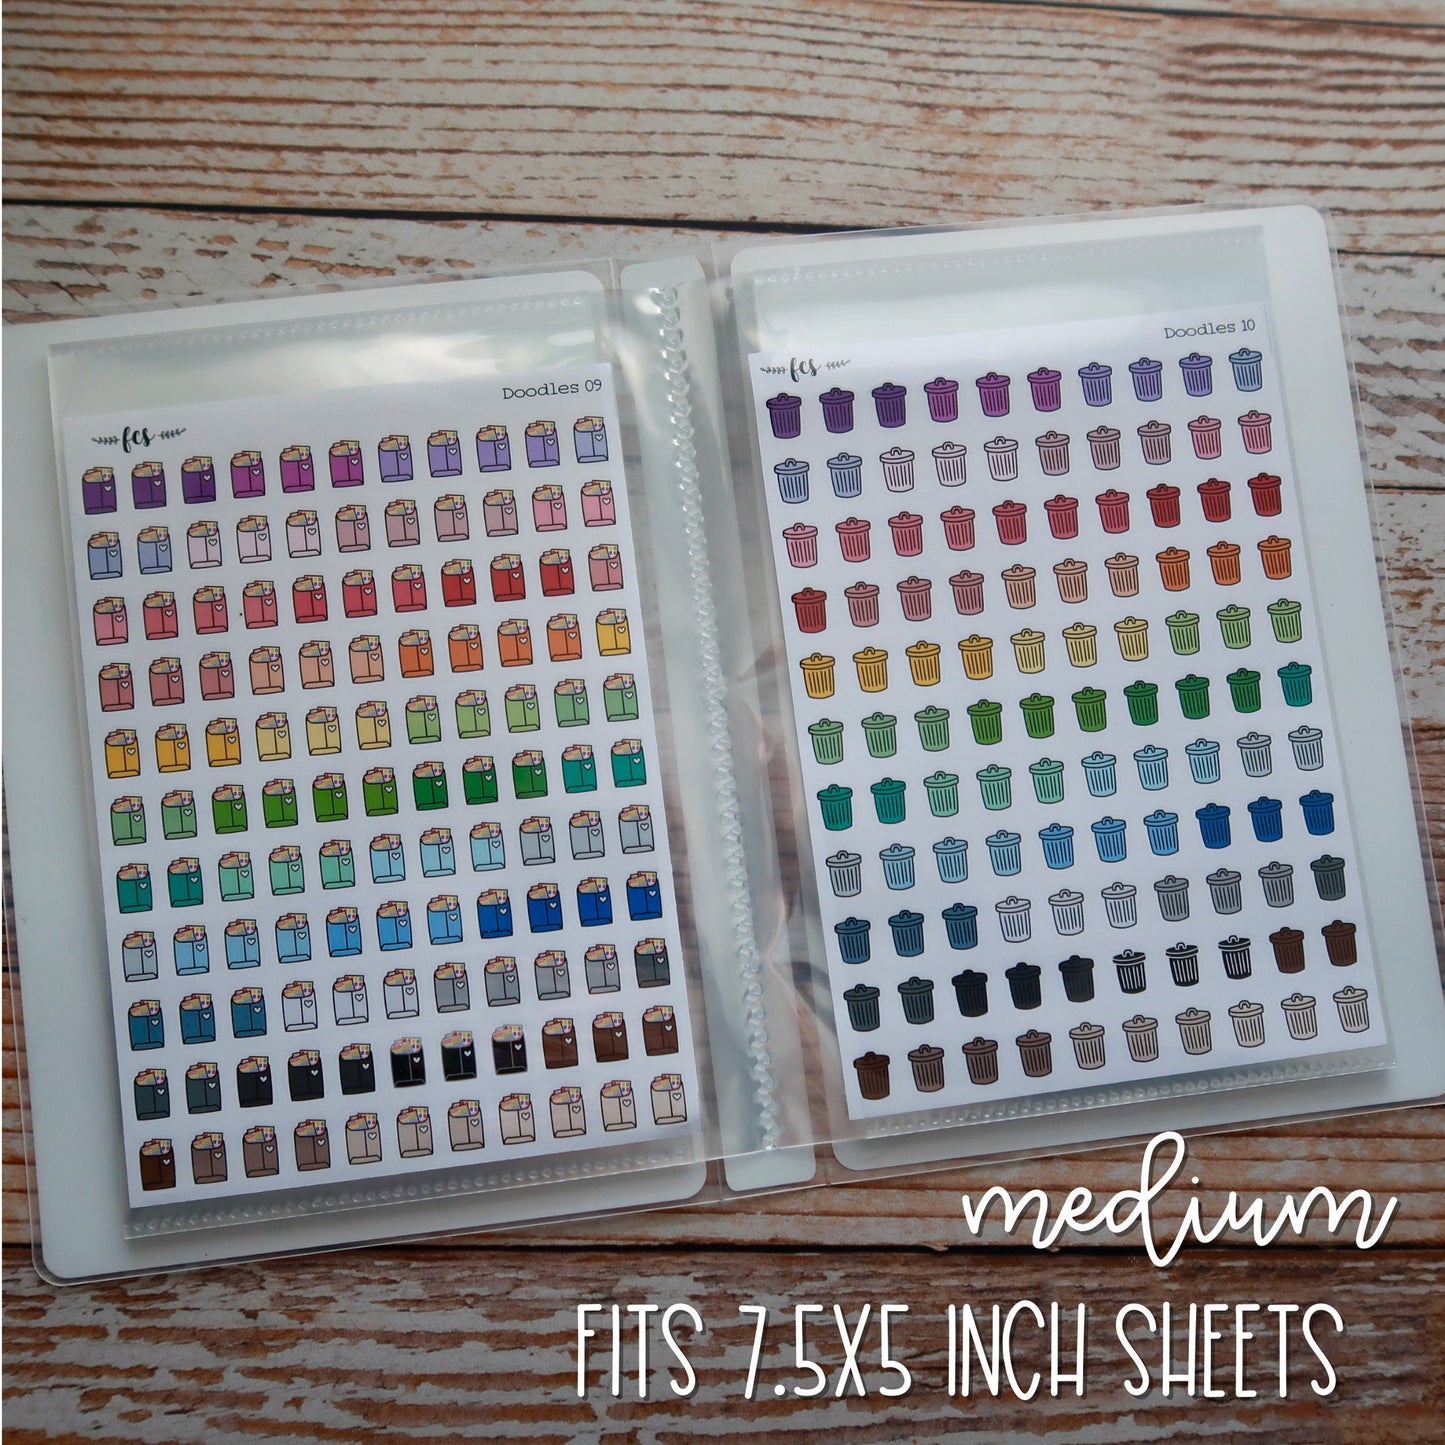 SB-WS || Watercolor Sunflowers sticker book in three sizes: 4.75x3.75 sheets, 7x5 sheets, and 8.5x5.5 sheets